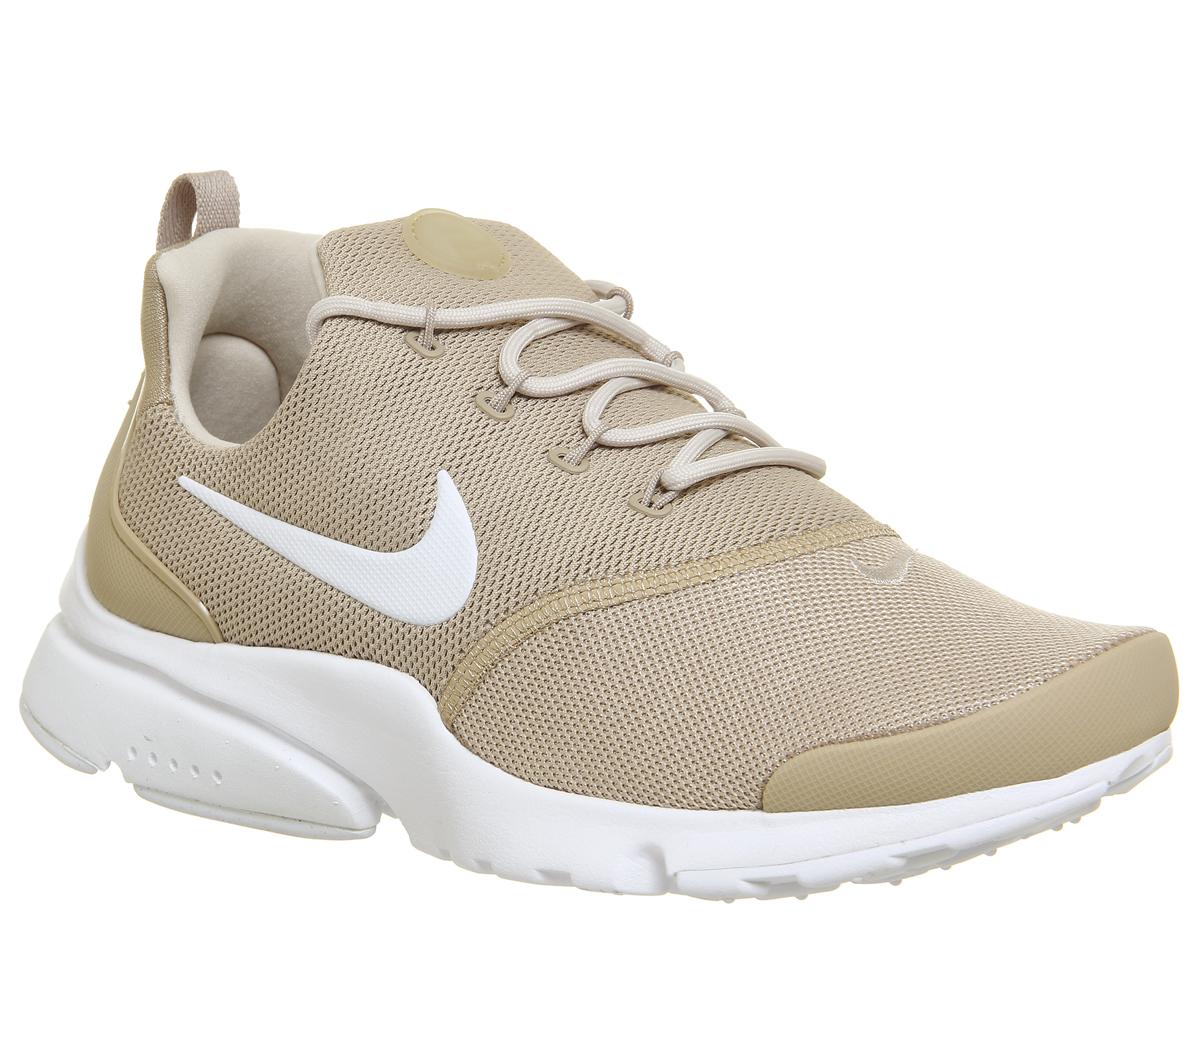 Nike Presto Fly Trainers Sand - Hers 